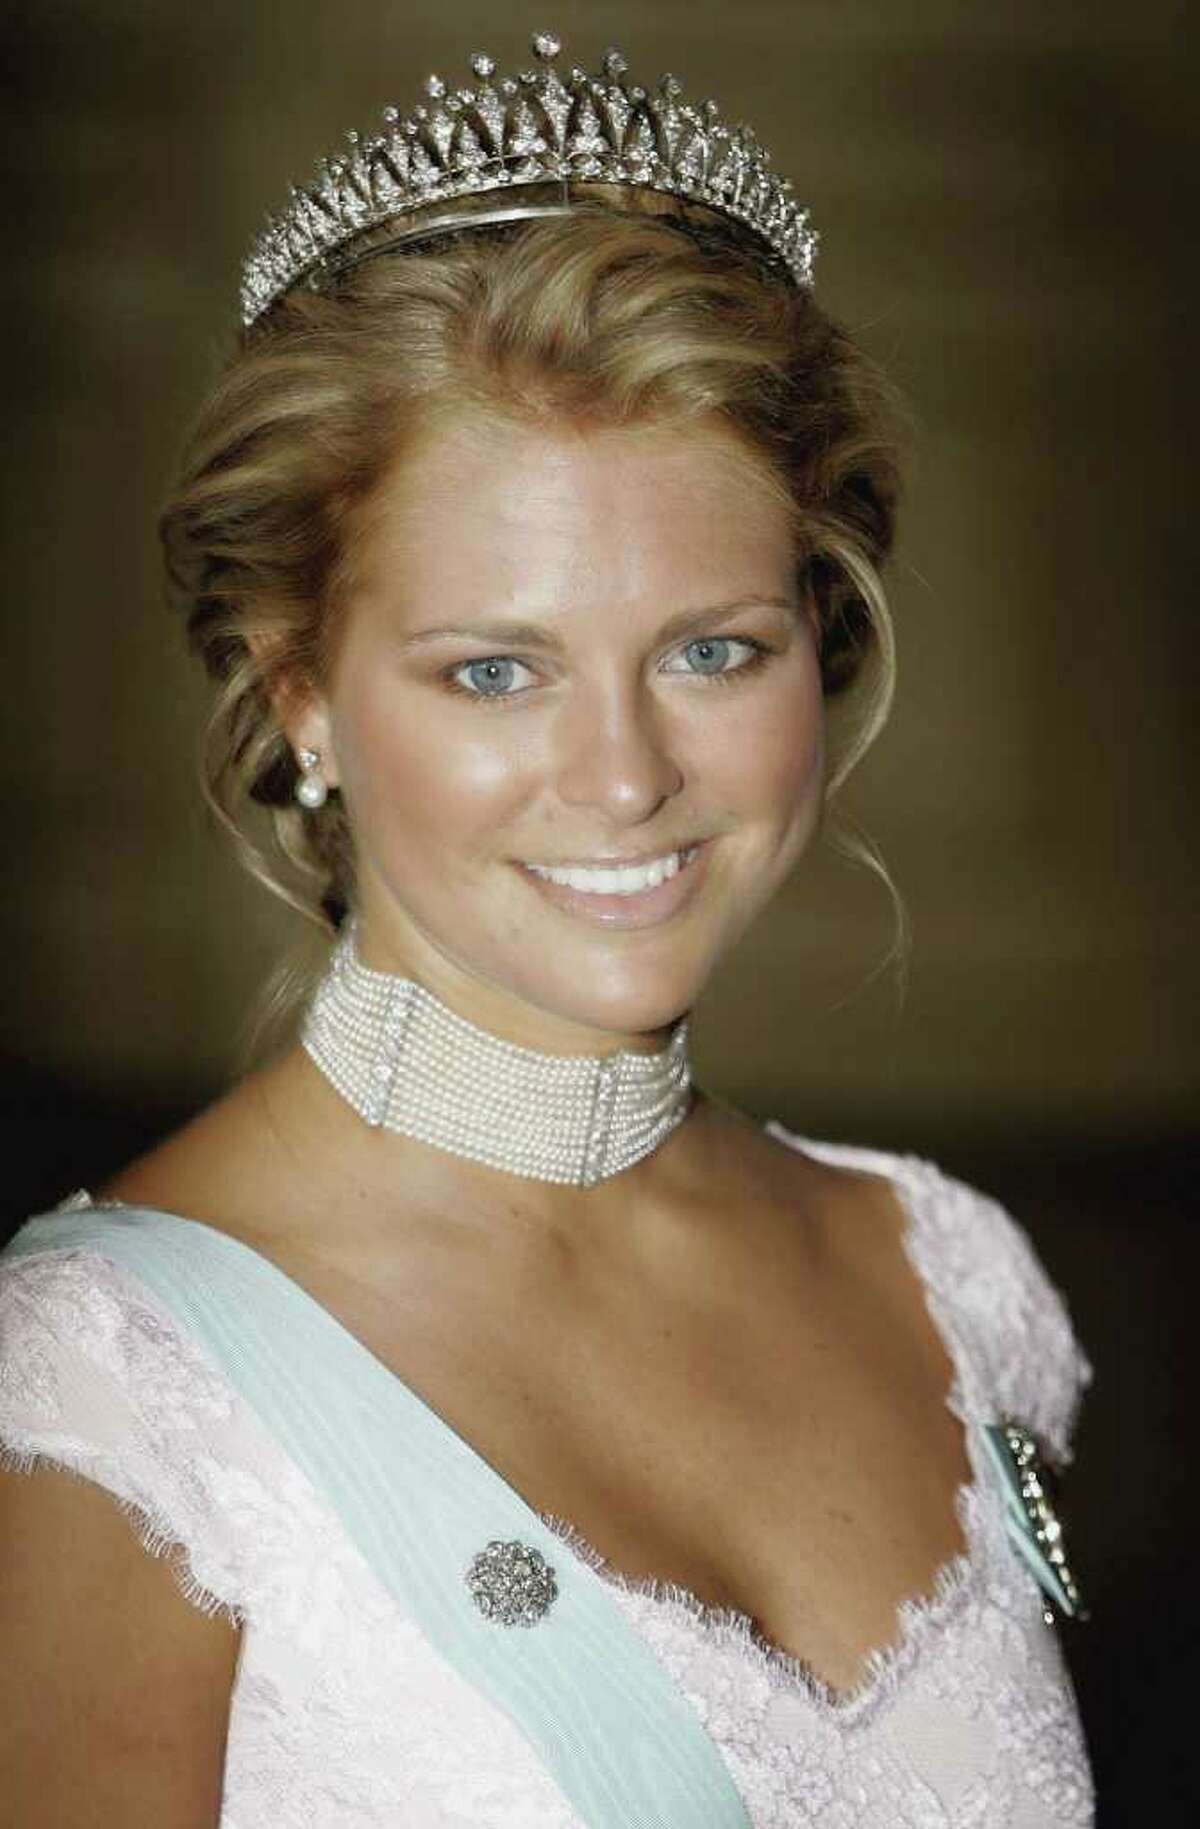 Sweden's Princess Madeleine, the younger, blonder sister of Crown Princess Victoria, turned 29 on Friday, June 10, 2011. While she's mostly made news for the affair-induced end of her engagement with Jonas Bergstroem, and the subsequent fallout, Madeleine has worked on causes benefiting women and children. Here, she arrives for the Gala Dinner at Royal Palace to celebrate King Carl XVI Gustaf of Sweden's 60th Birthday on April 30, 2006 in Stockholm, Sweden.